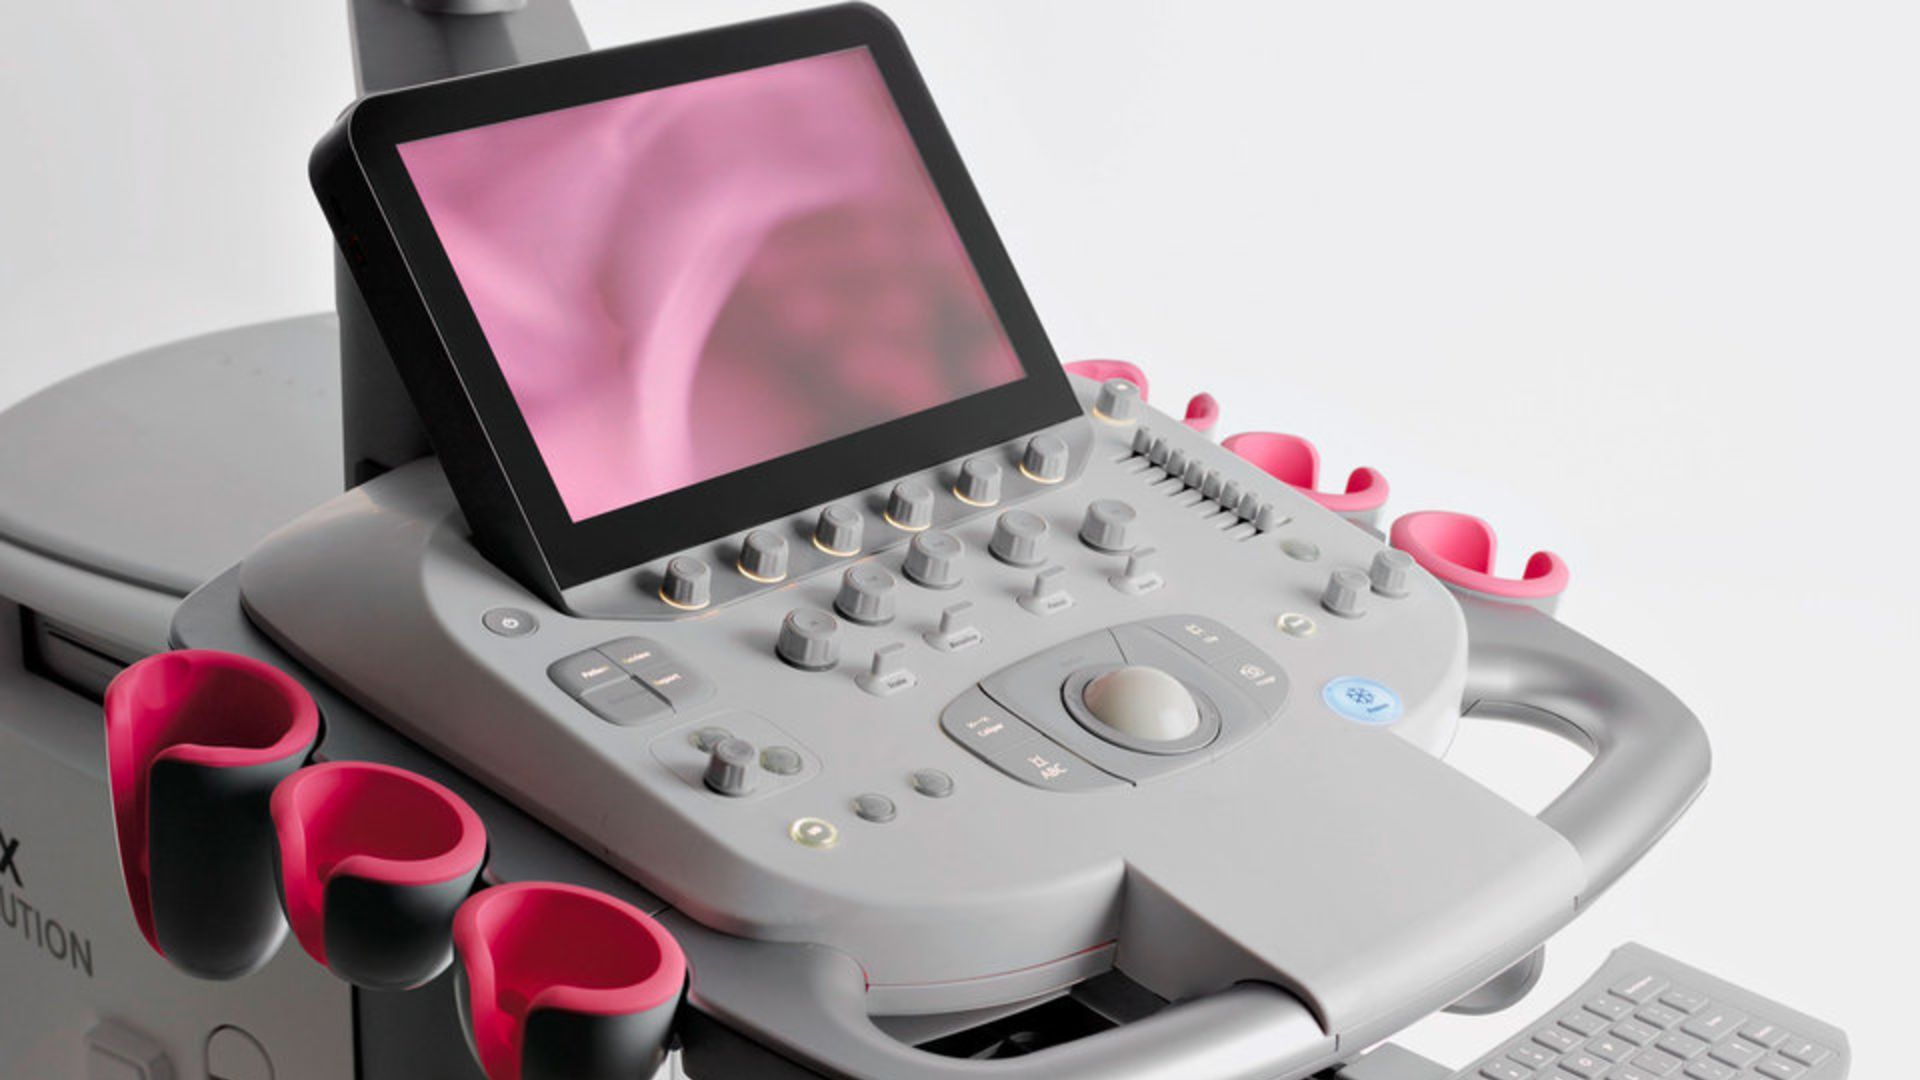 acuson_s1000_ultrasound_system_helx_evolution_with_touch_control-02422913_10-06551667_8